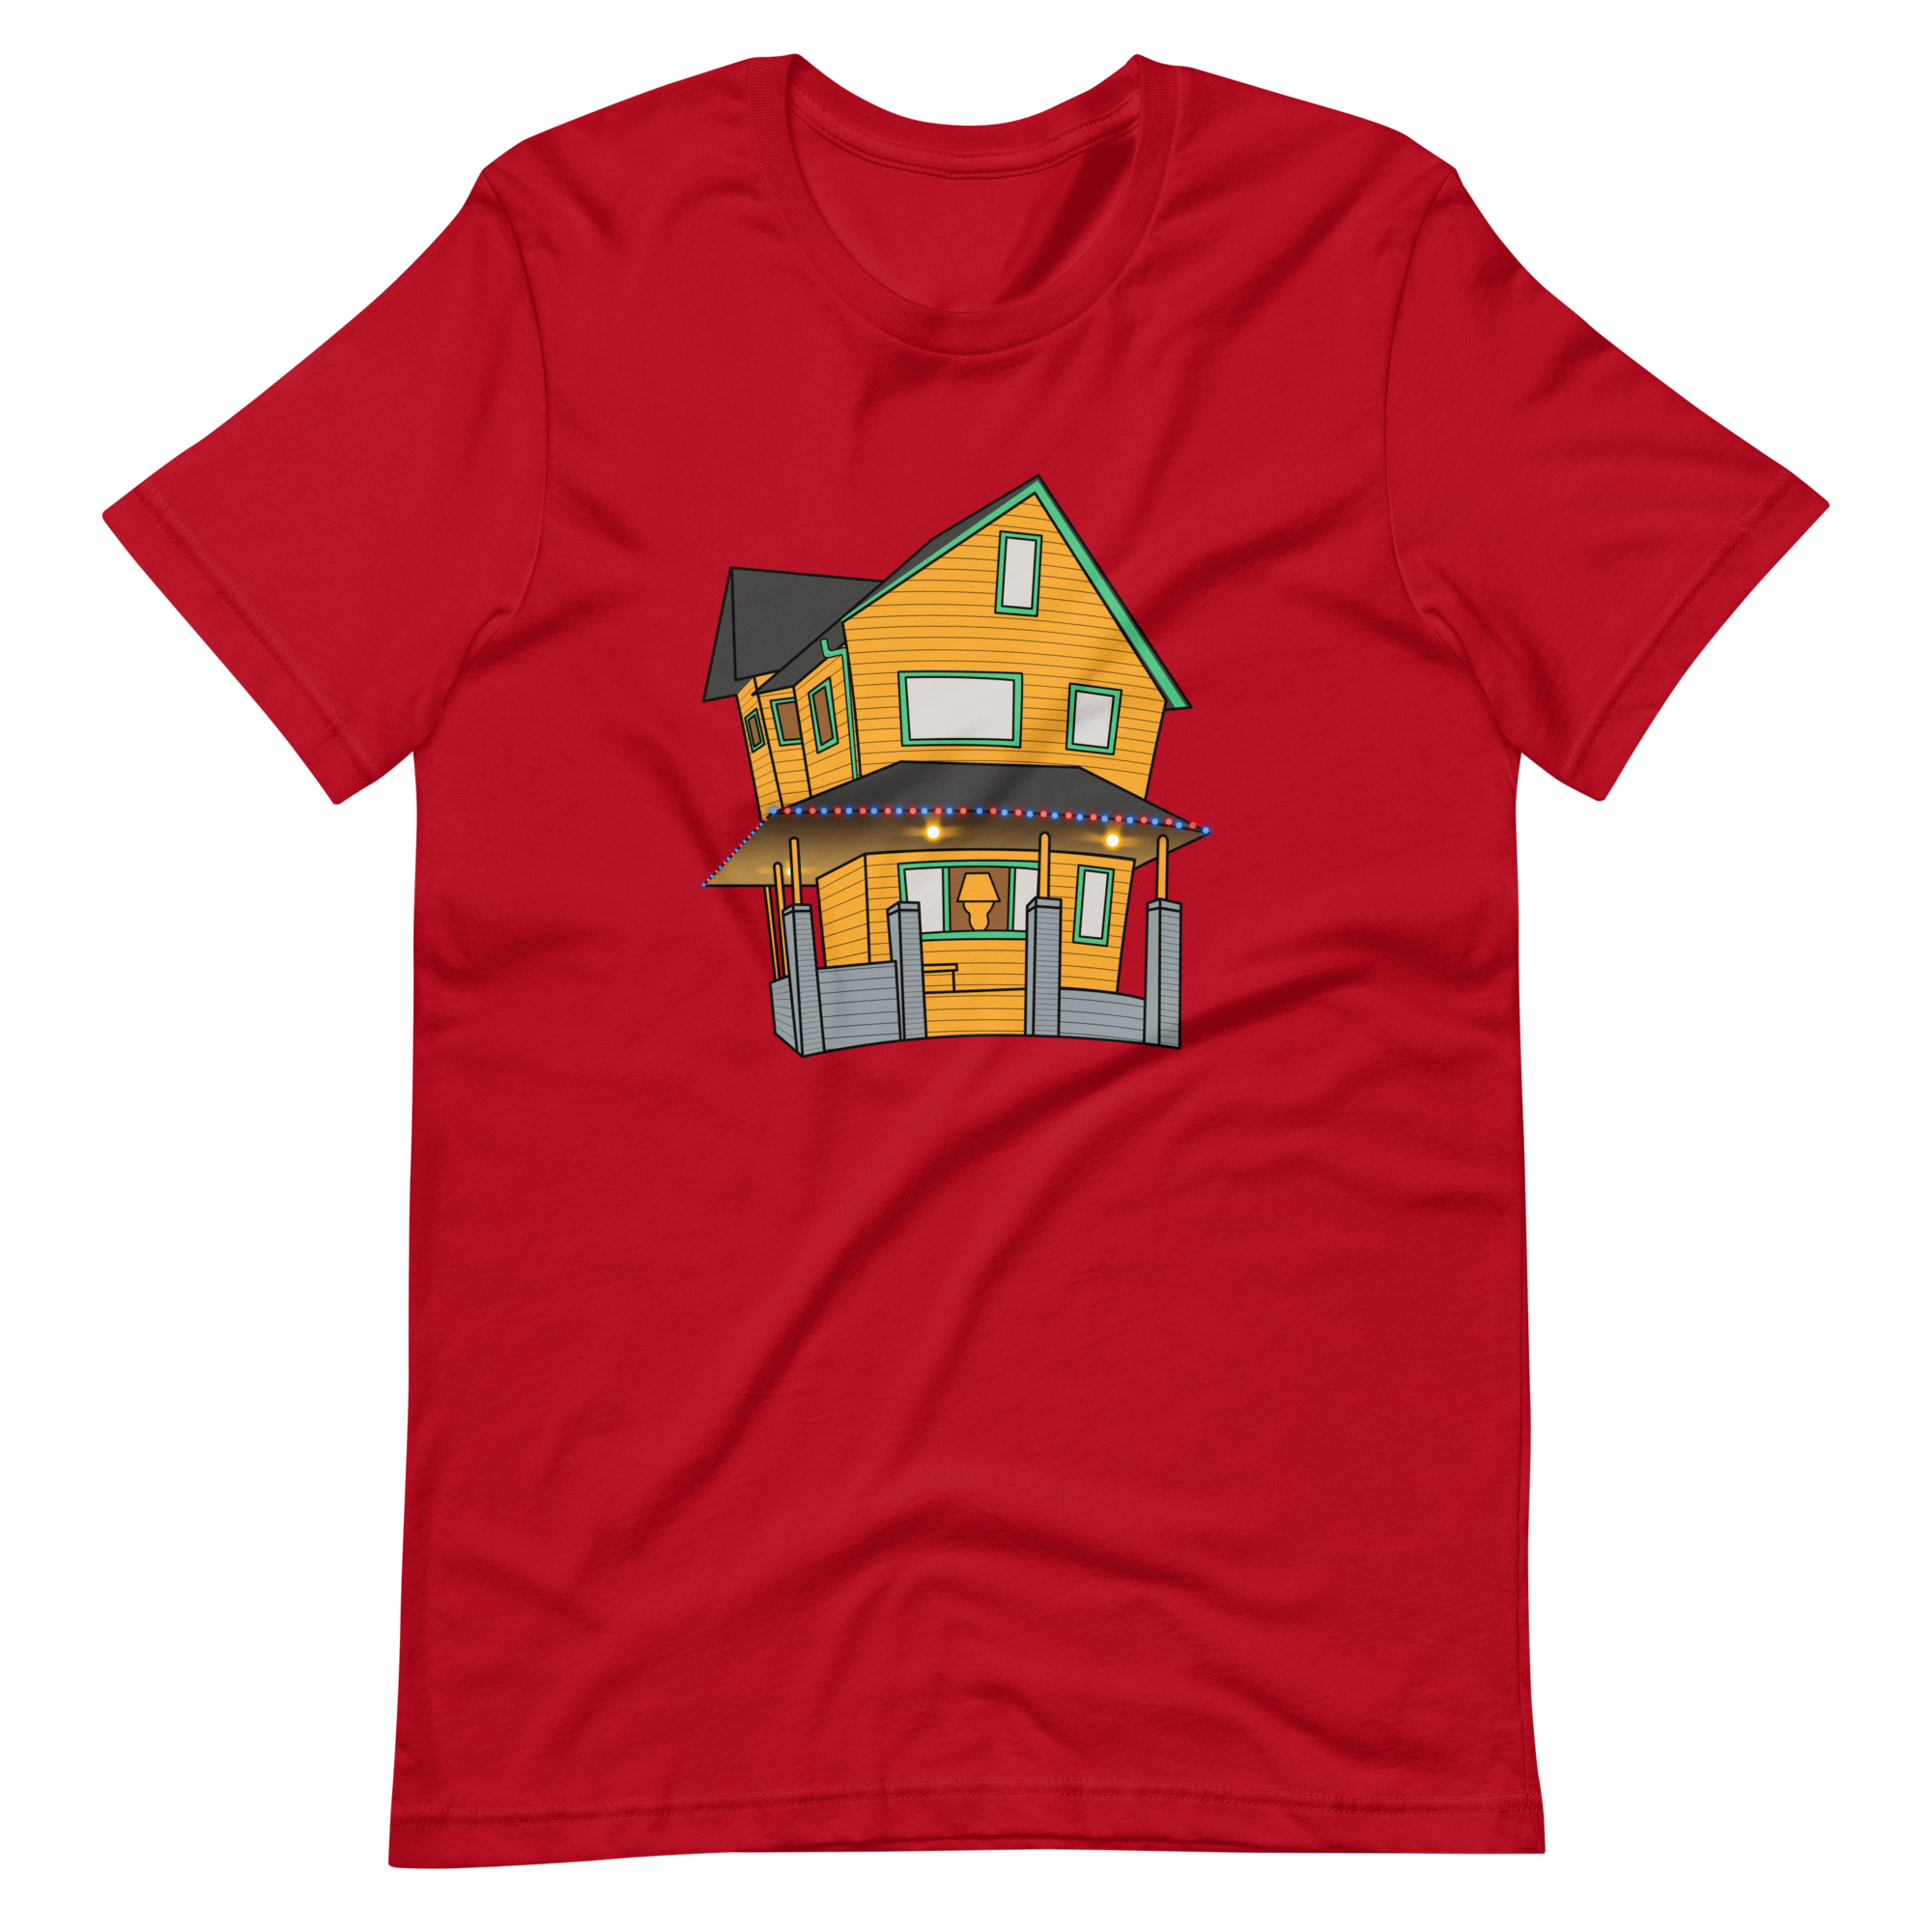 Cleveland Christmas Story House Red T-Shirt